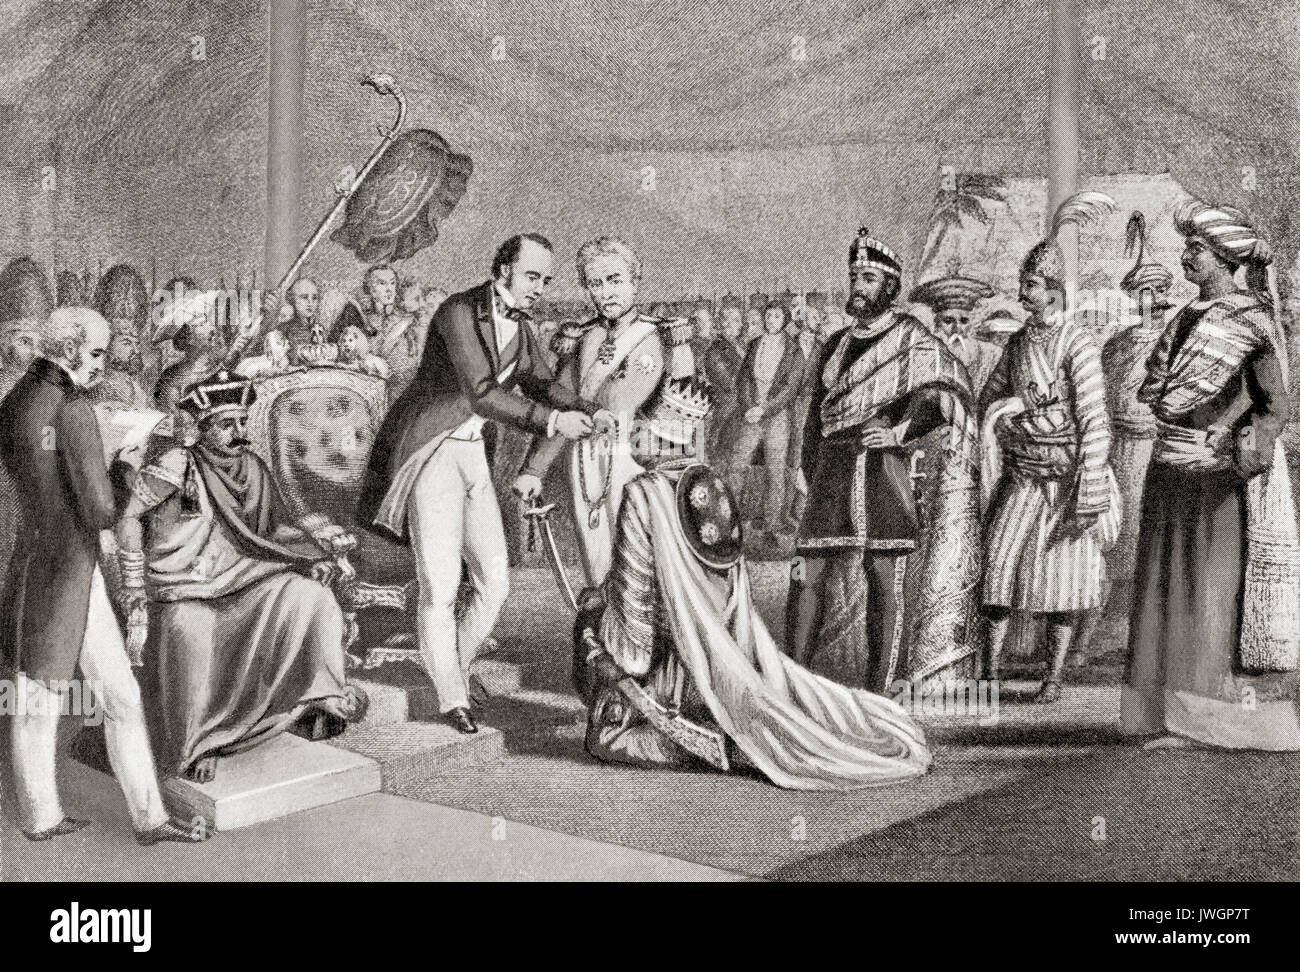 The Rajas of Rewa, Benares and Chikari being decorated for their loyalty to the English during the Indian Mutiny by Lord Canning at Cawnpore in 1859.  Charles John Canning, 1st Earl Canning, 1812 – 1862 aka The Viscount Canning.  English statesman and Governor-General of India during the Indian Rebellion of 1857.  From Hutchinson's History of the Nations, published 1915. Stock Photo